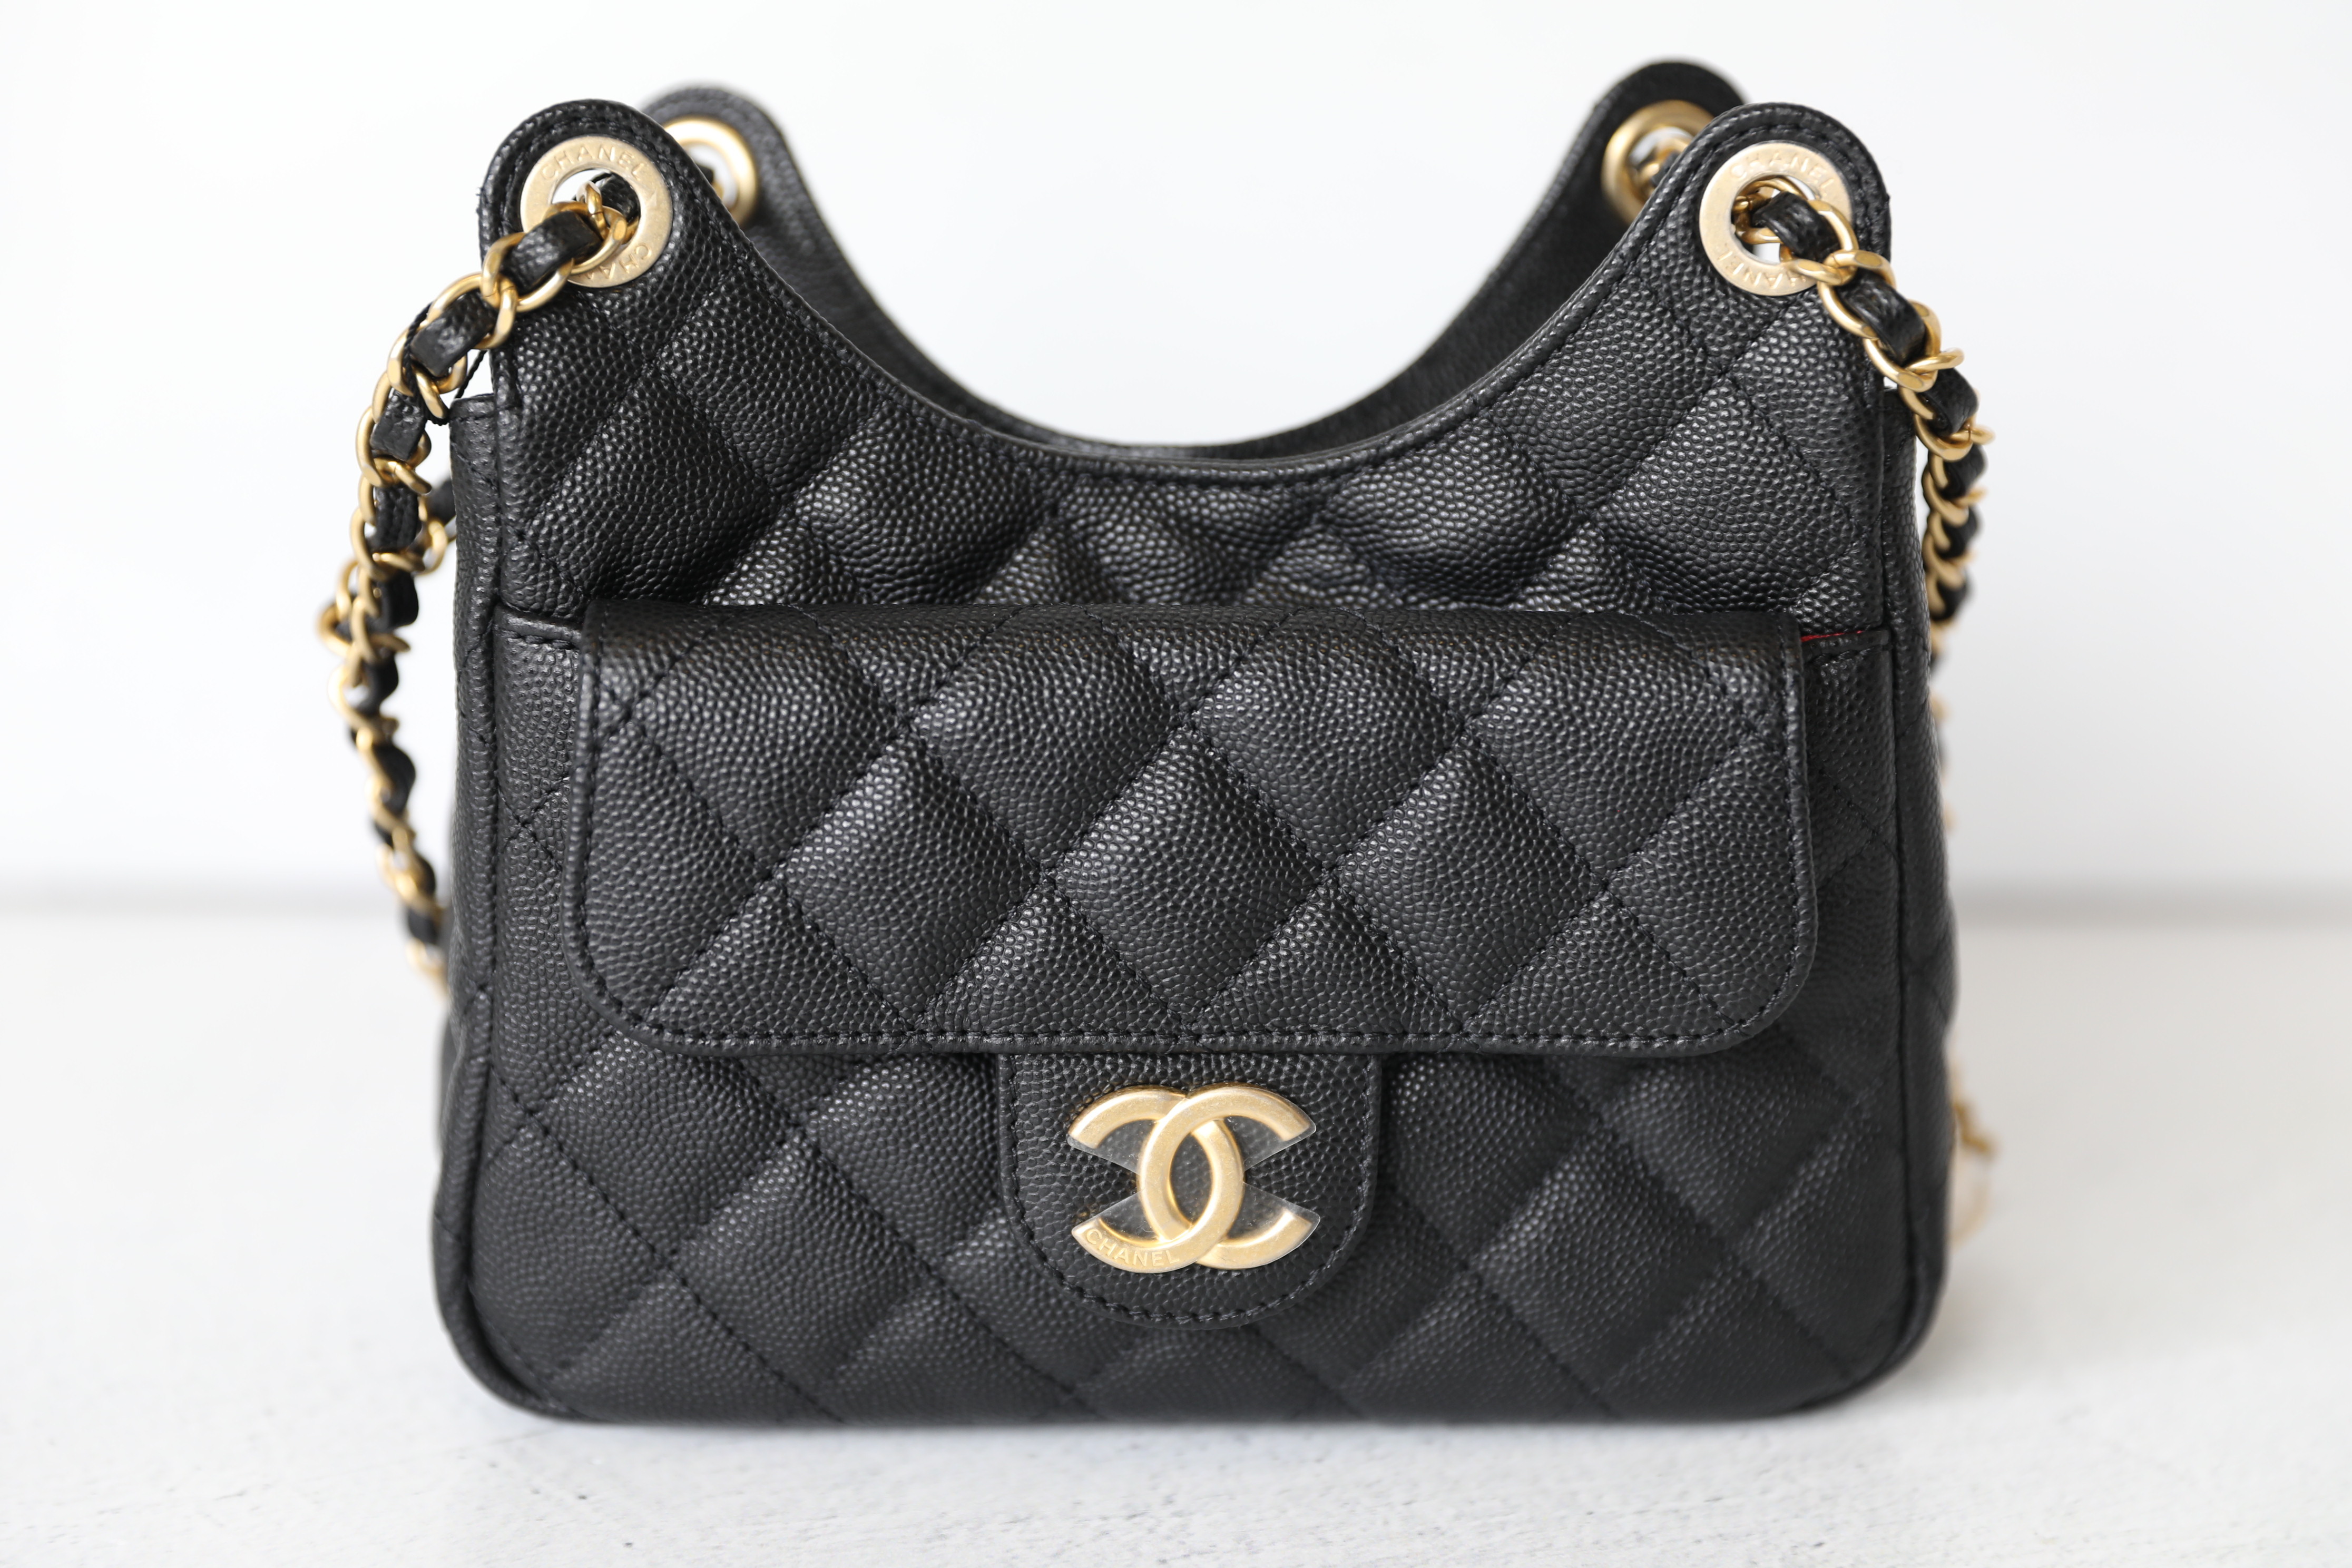 Chanel Hobo Bag Small, Black Caviar Leather with Gold Hardware